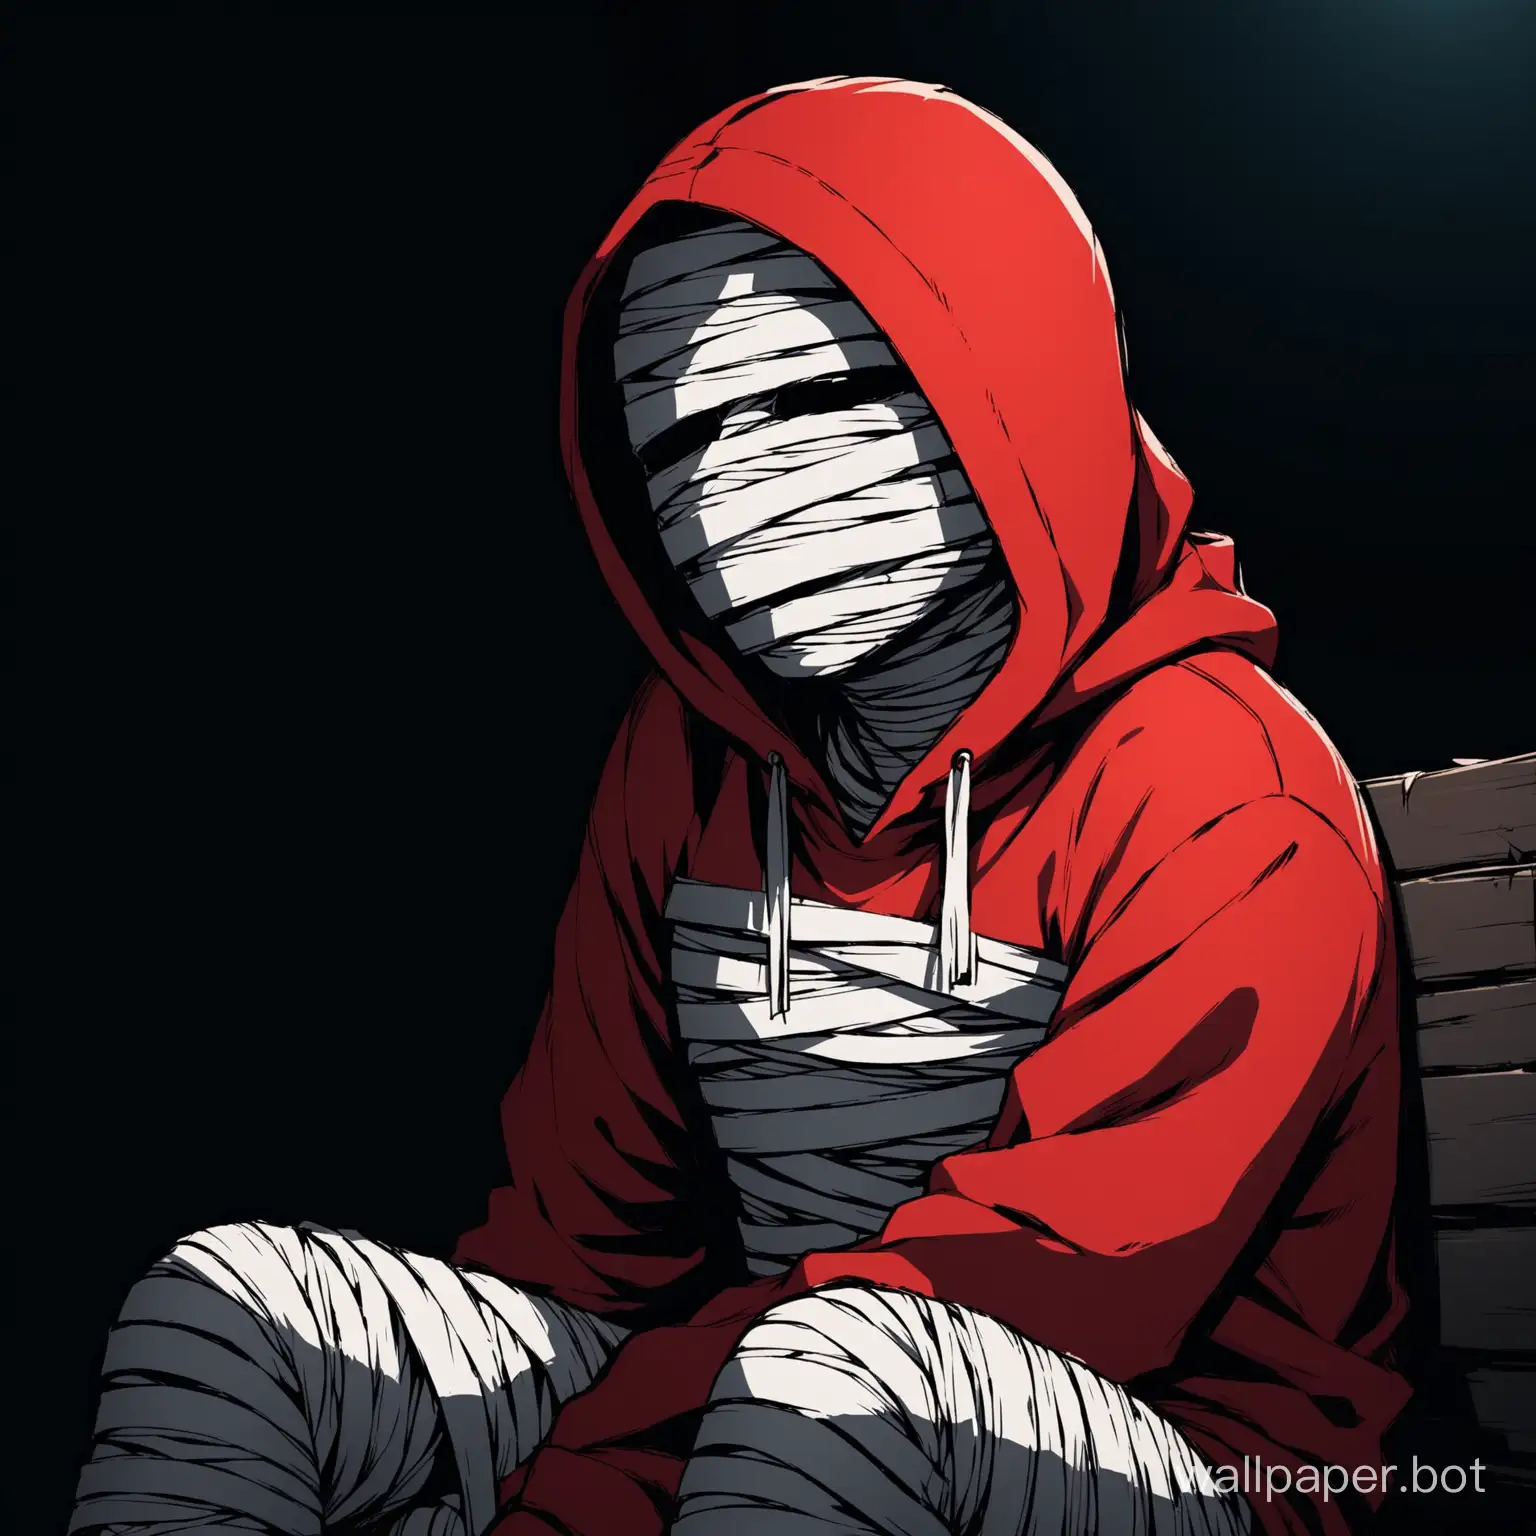 red hoodie guy crying sitting in the dark having face is full of bandage just like a mummy